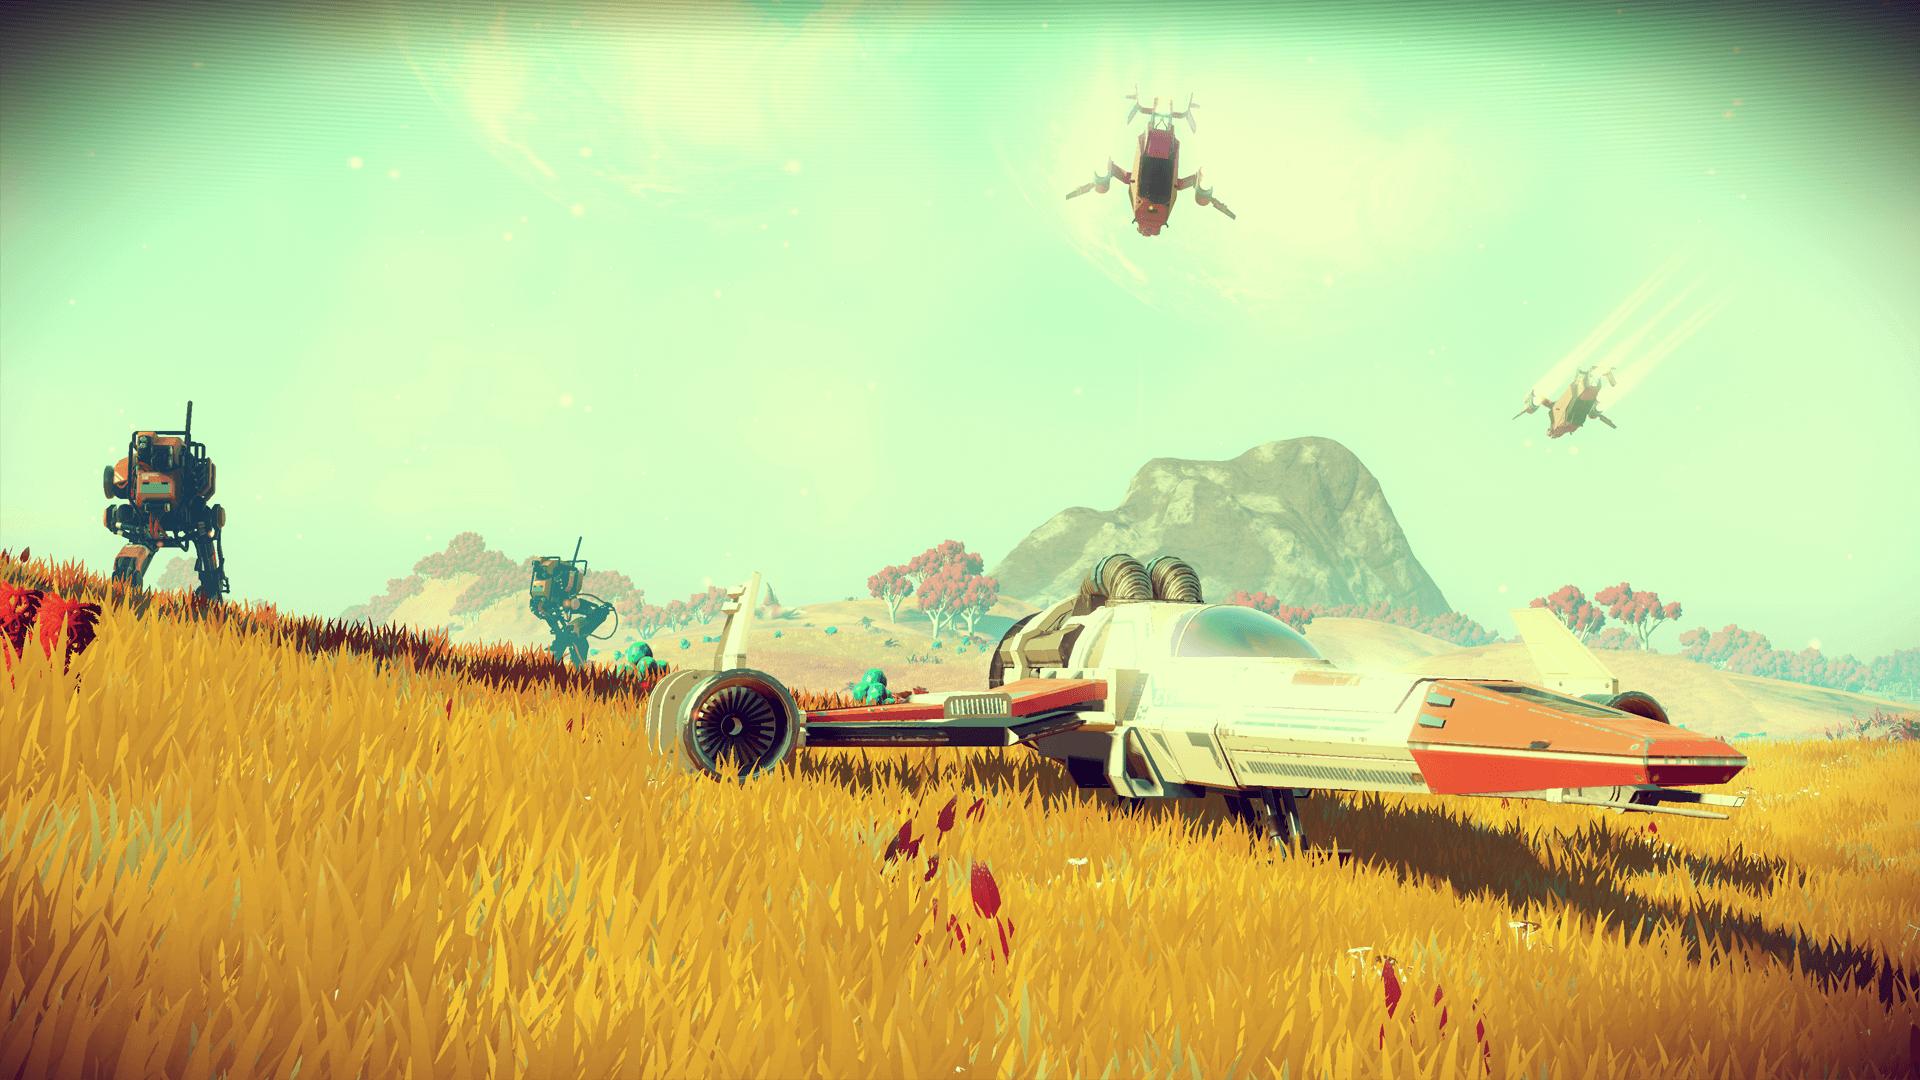 A small space ship is parked in a meadow on an alien planet featured in the video game No Man's Sky. Beyond the ship, a mountain range is visible, as are some advanced robotic lifeforms.